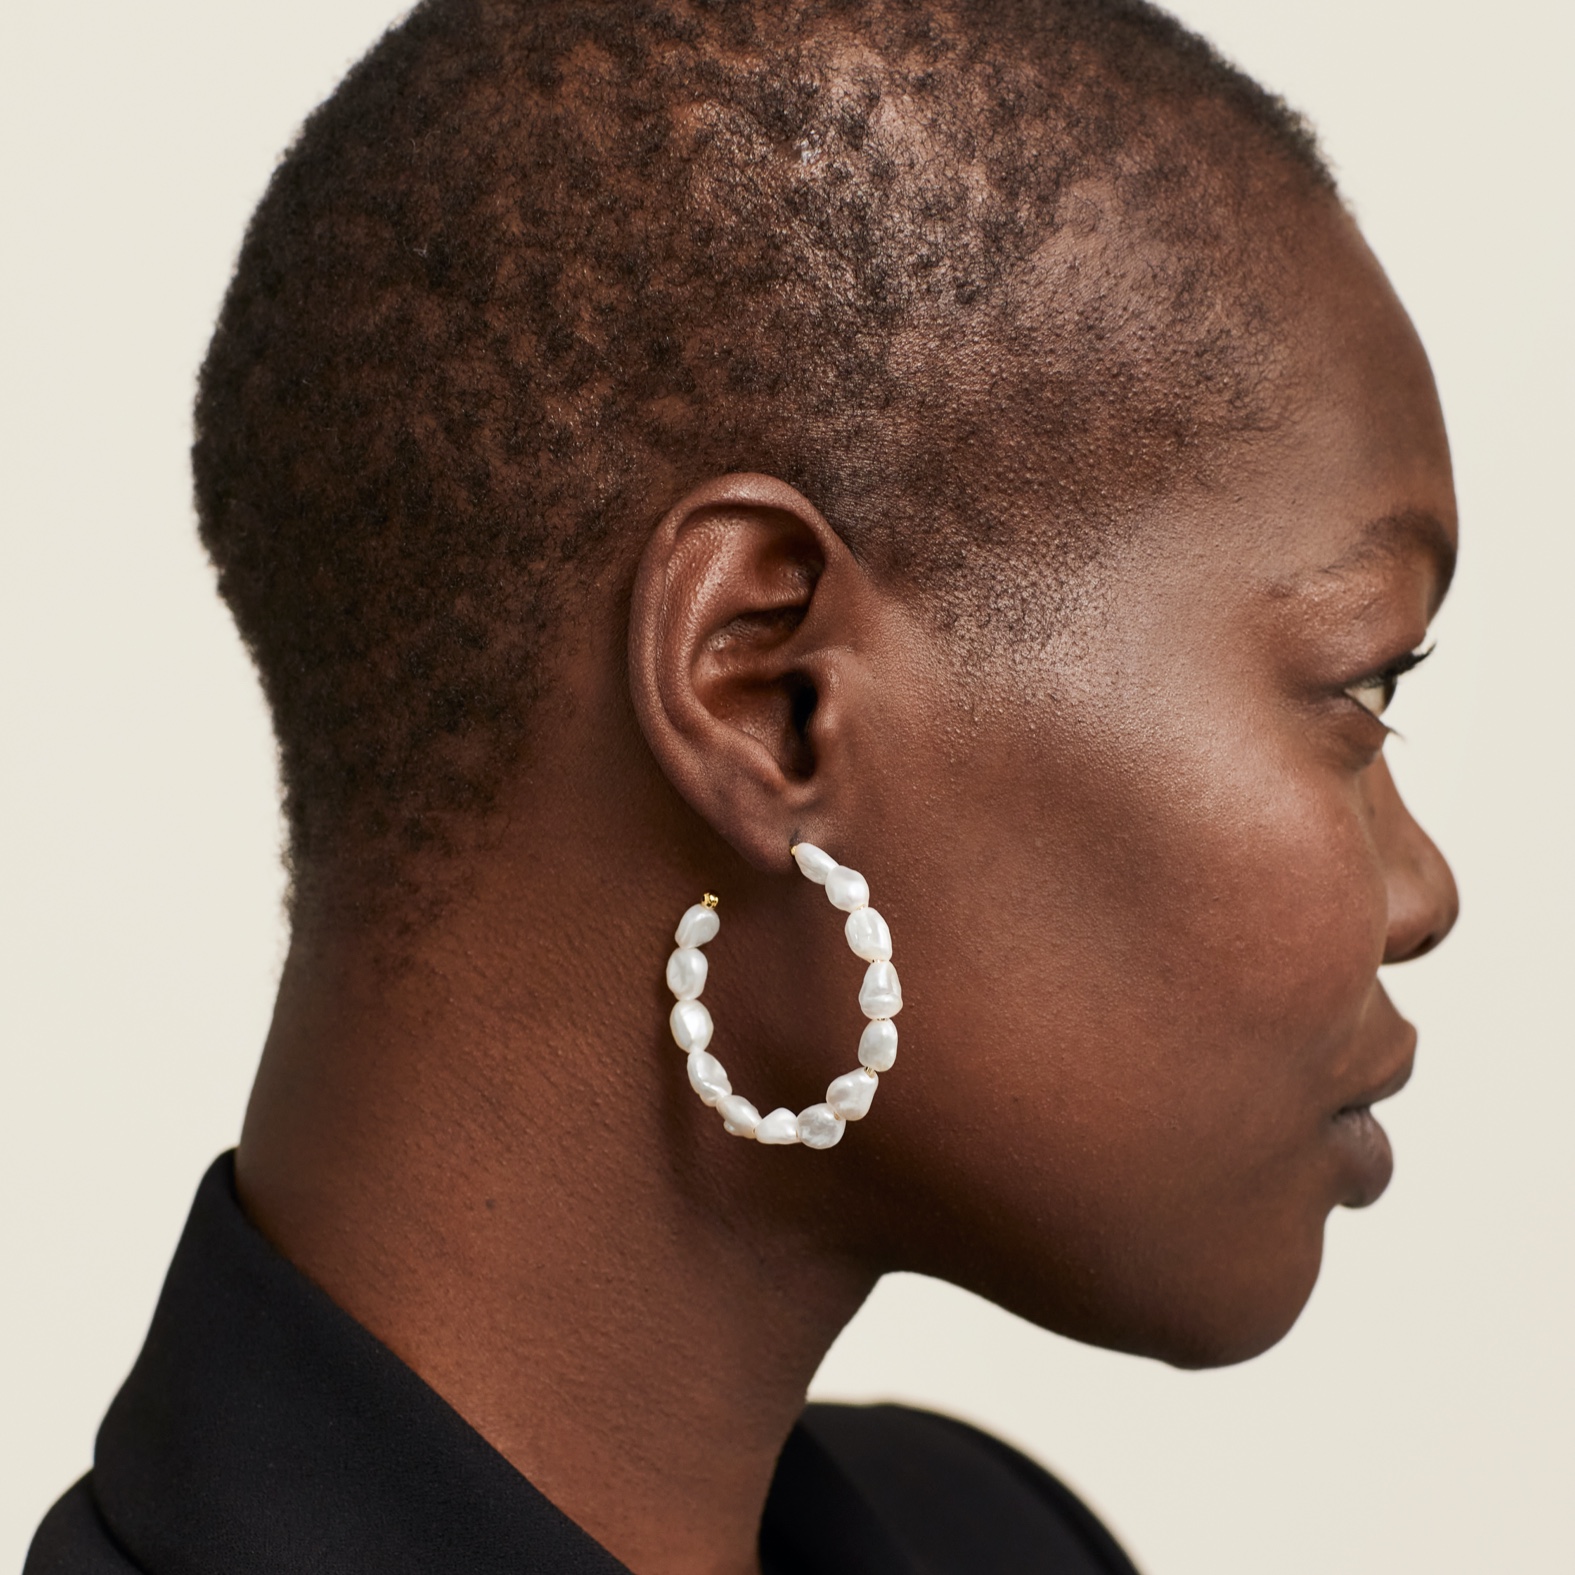 Pearl Jewelry Perfect for Channeling Your Inner Kamala - V Magazine